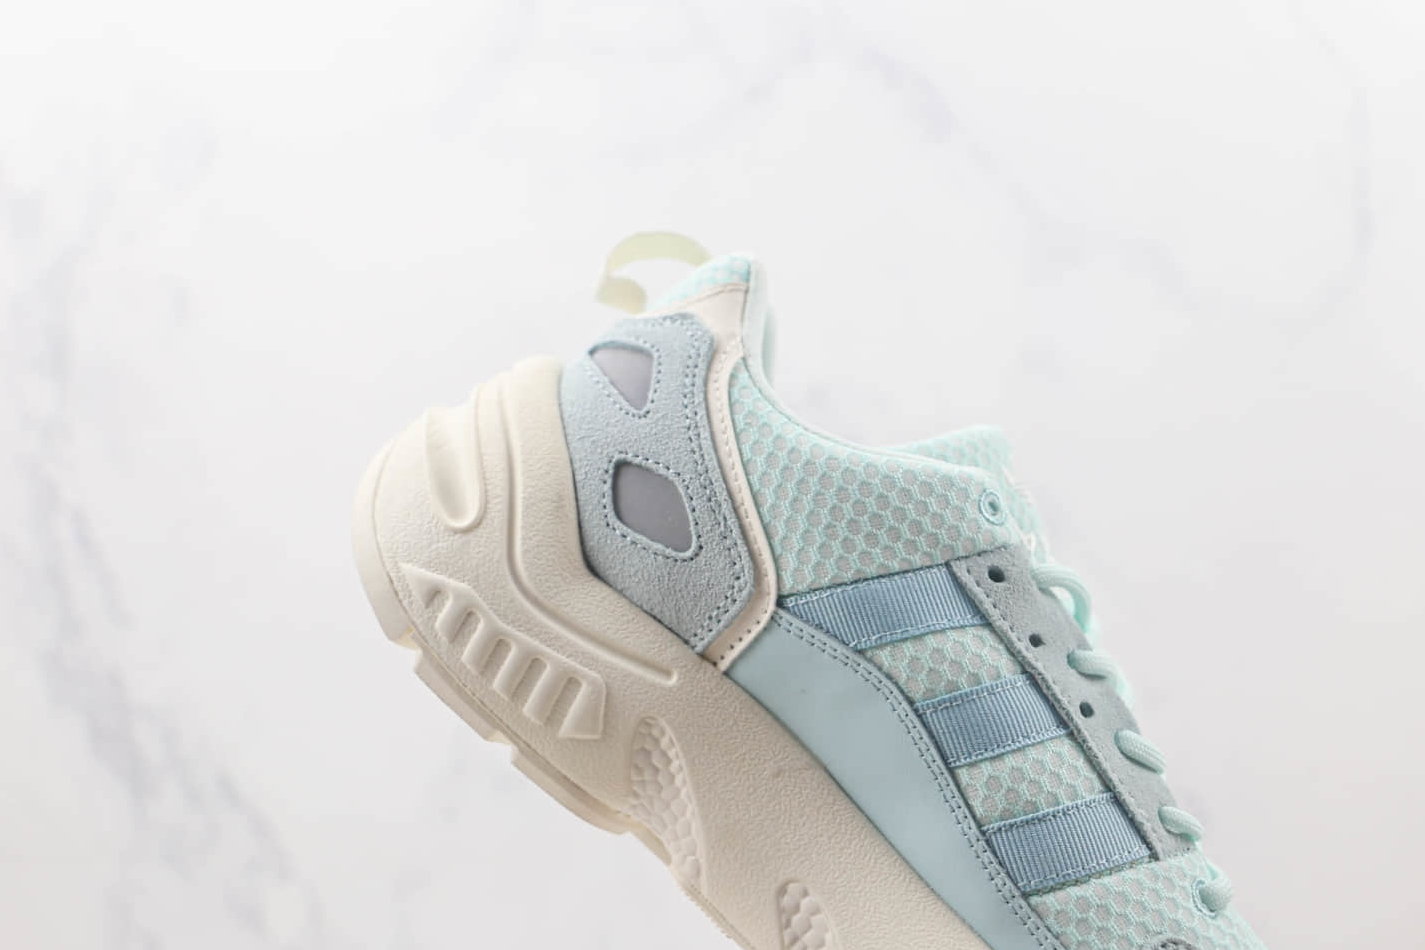 Adidas Originals ZX 22 Boost 'Almost Blue' GX4611 - Limited Edition Sneakers